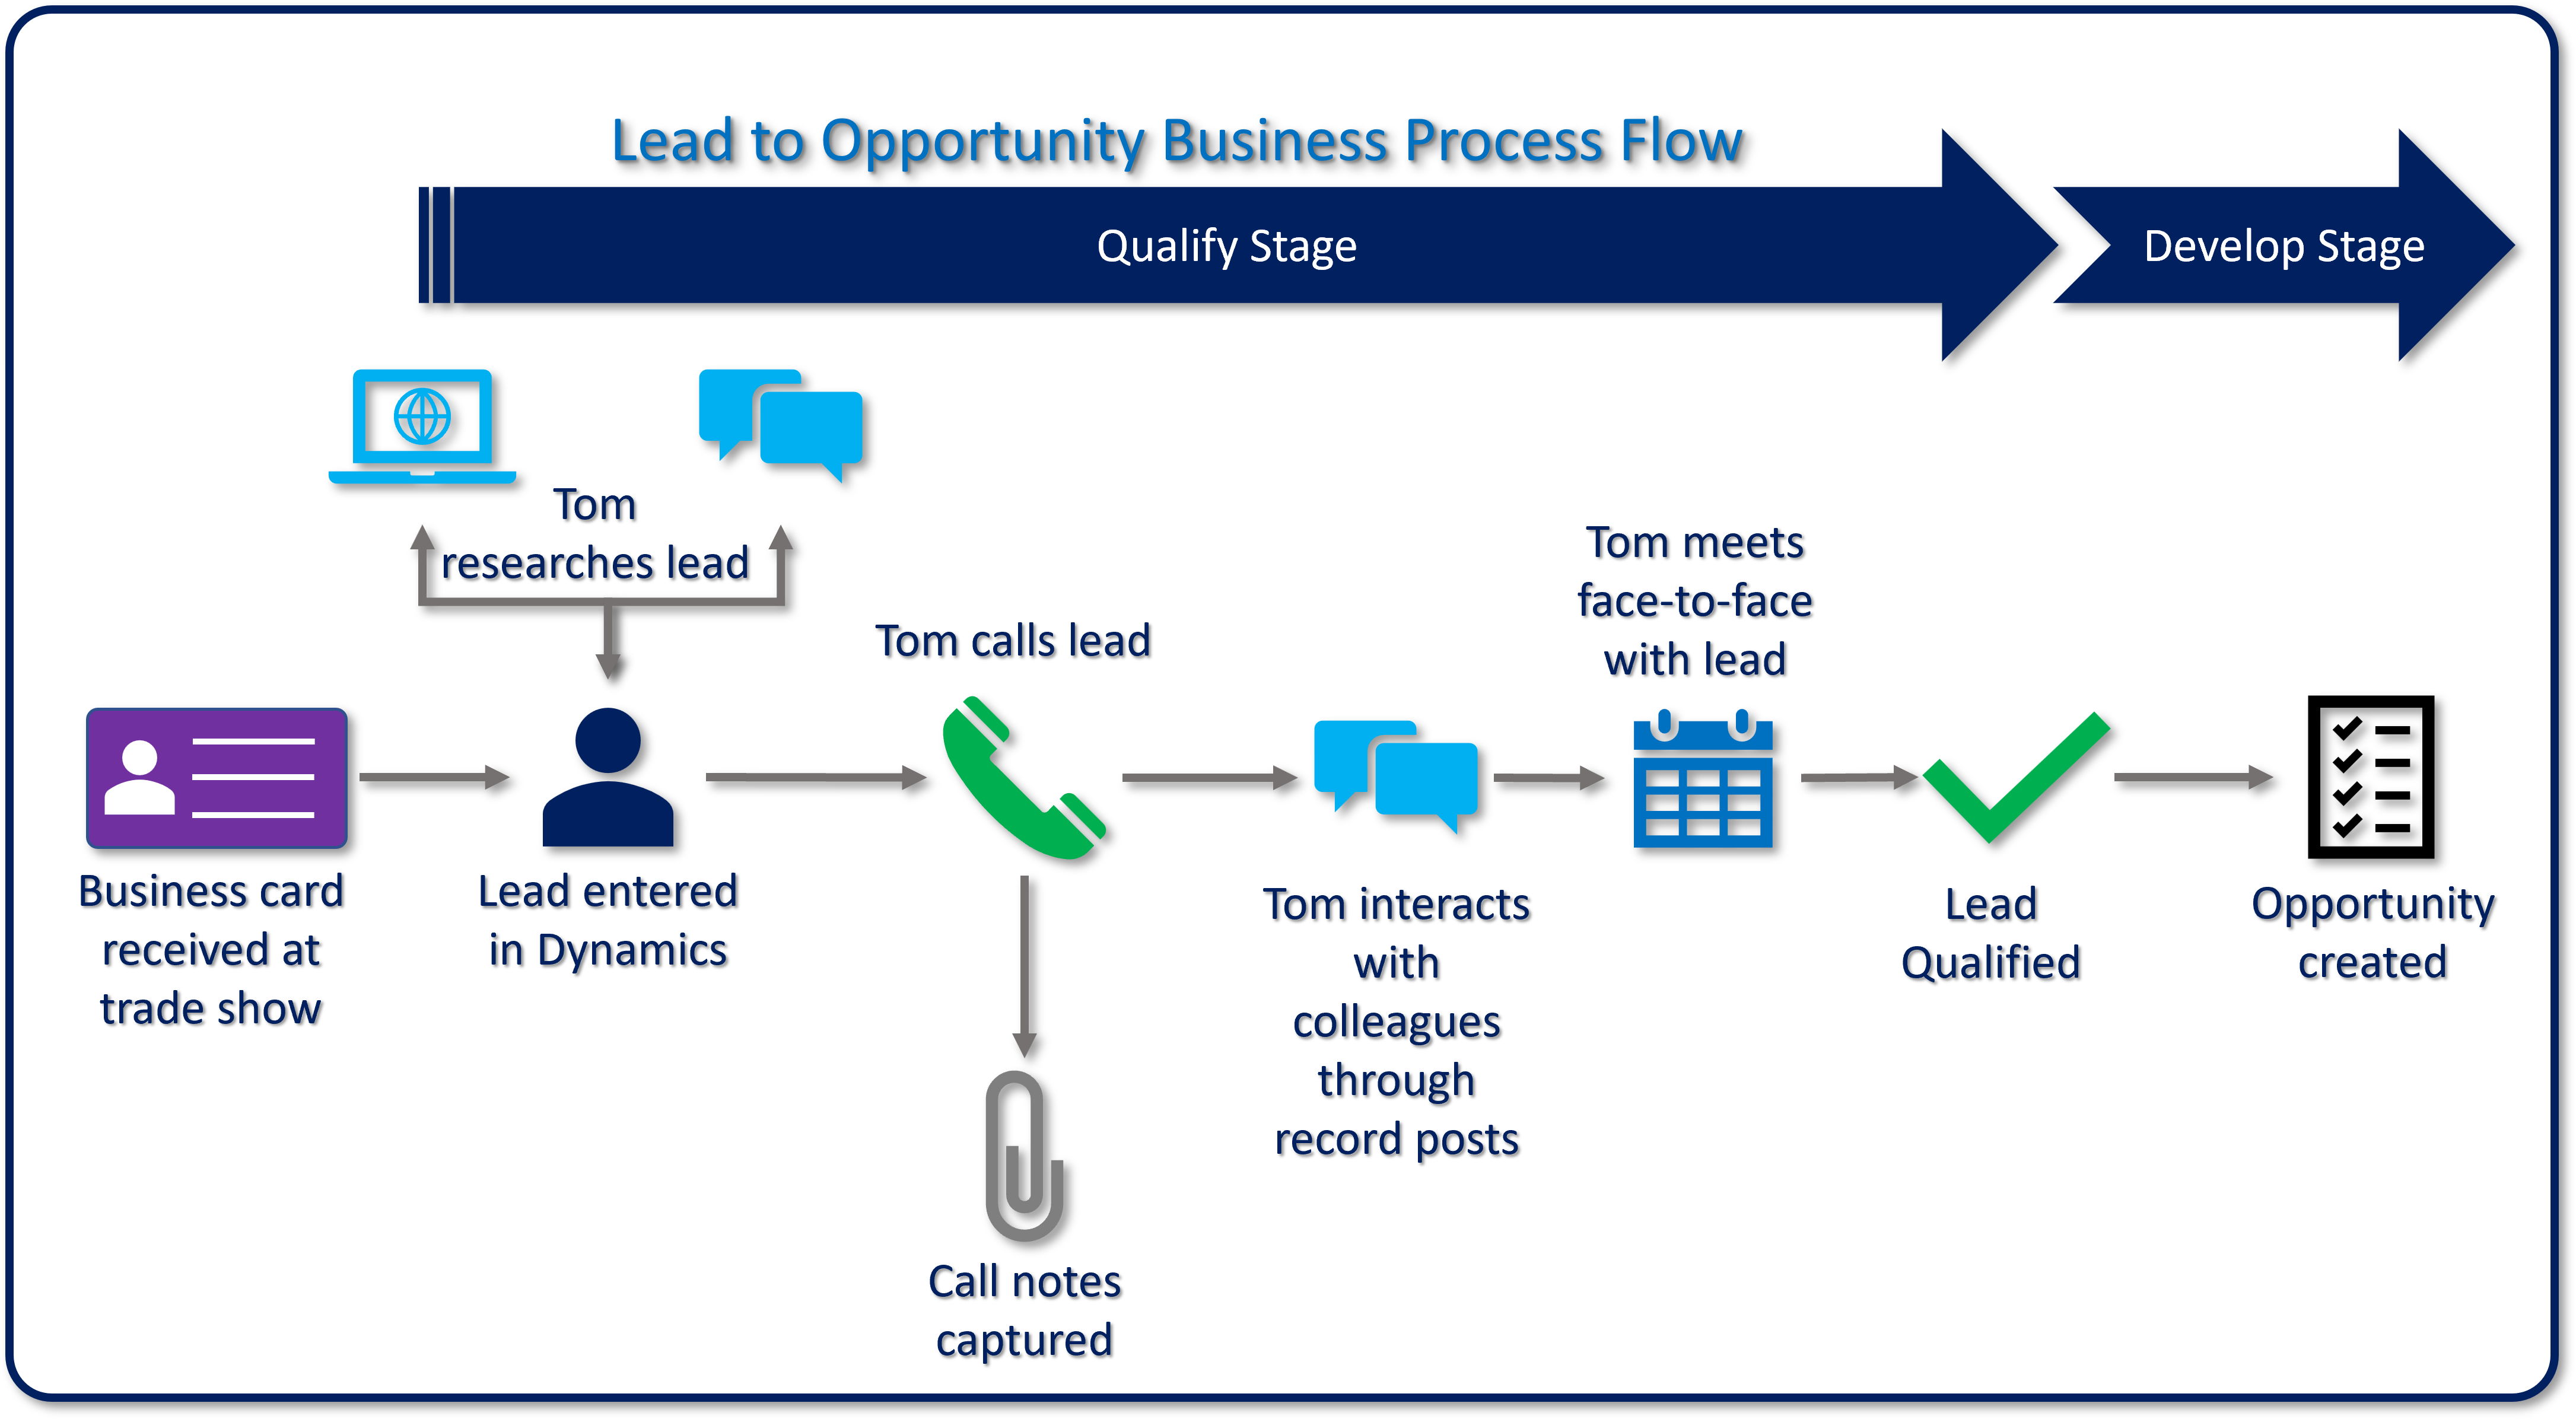 Lead-to-opportunity flow diagram. Qualify Stage to Develop Stage (Oportunity created).